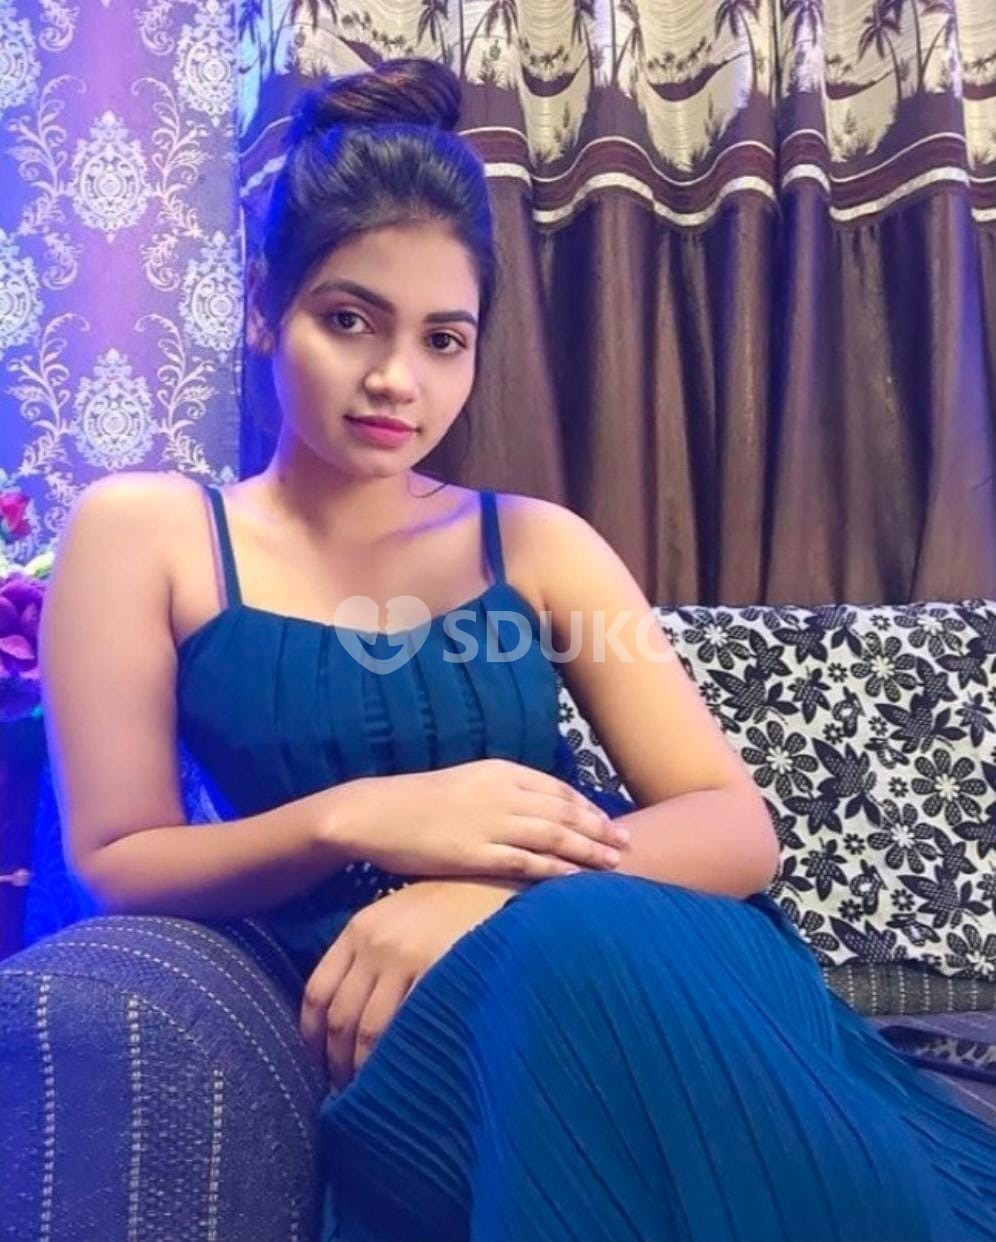 PEENYA (BANGALORE) 77375//8937 HIGH PROFILE HOT SEXY VIP INDEPENDENT CALL GIRLS AVAILABLE ANYTIME CALL ME FULL SAFE AND 